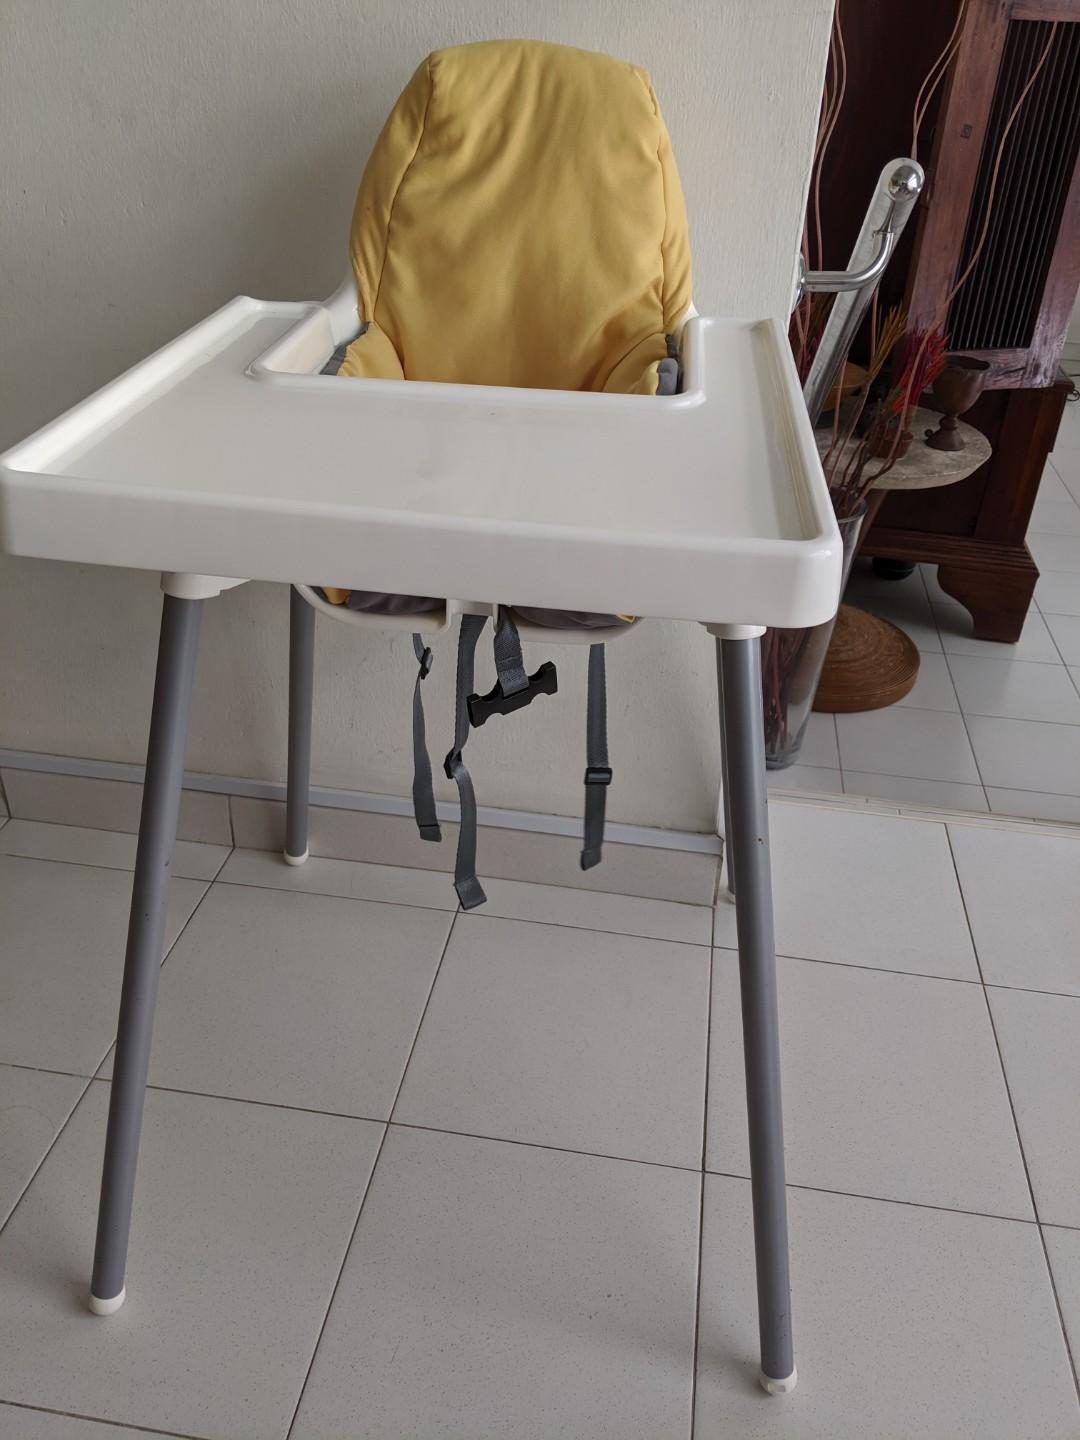 baby changing unit with storage